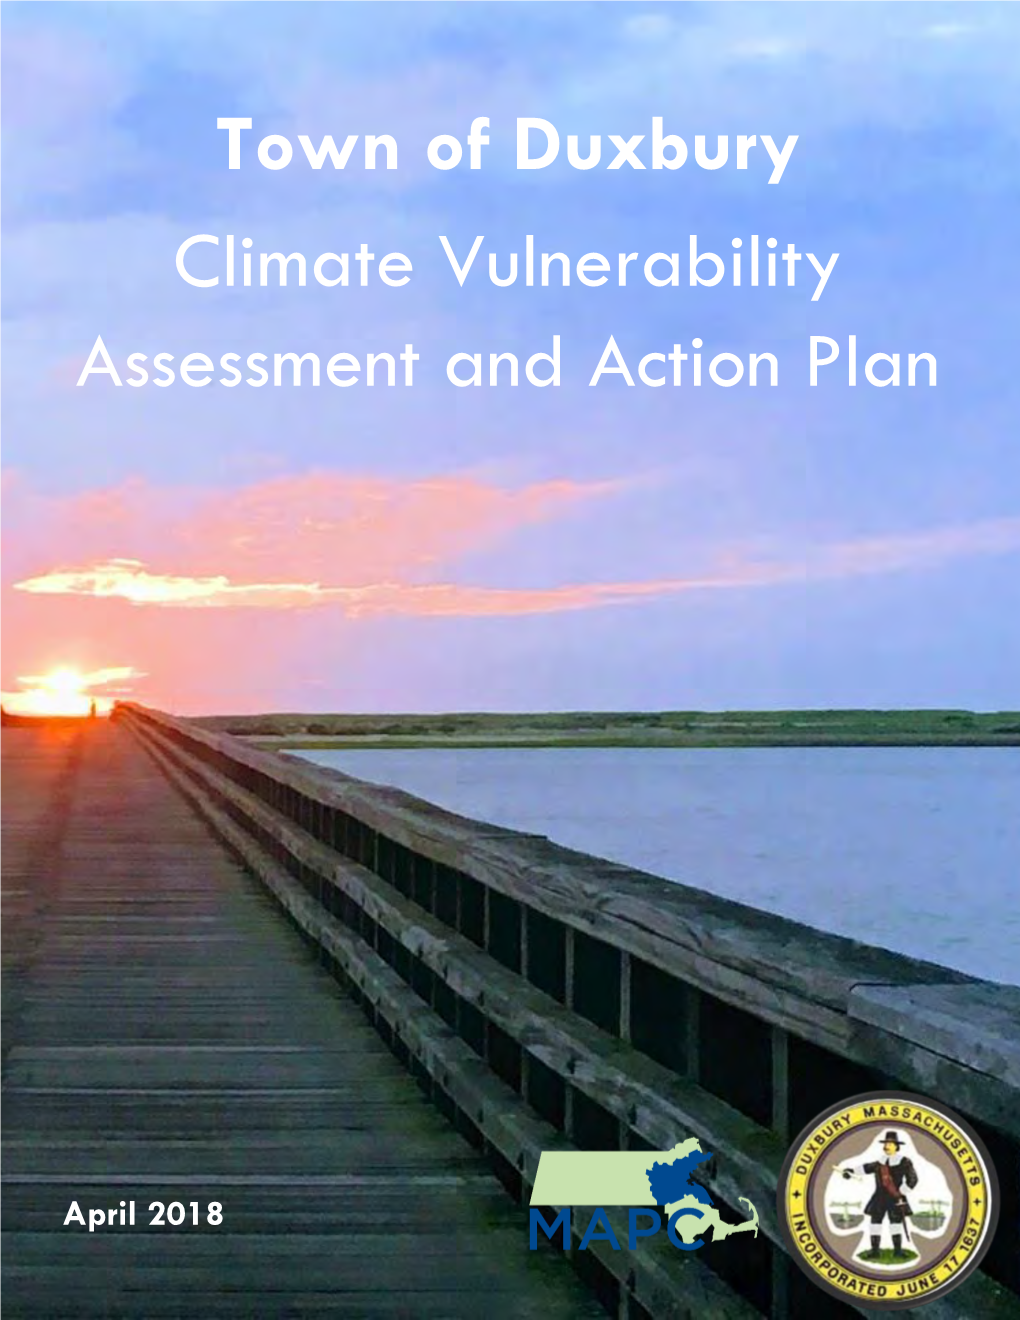 Town of Duxbury Climate Vulnerability Assessment and Action Plan